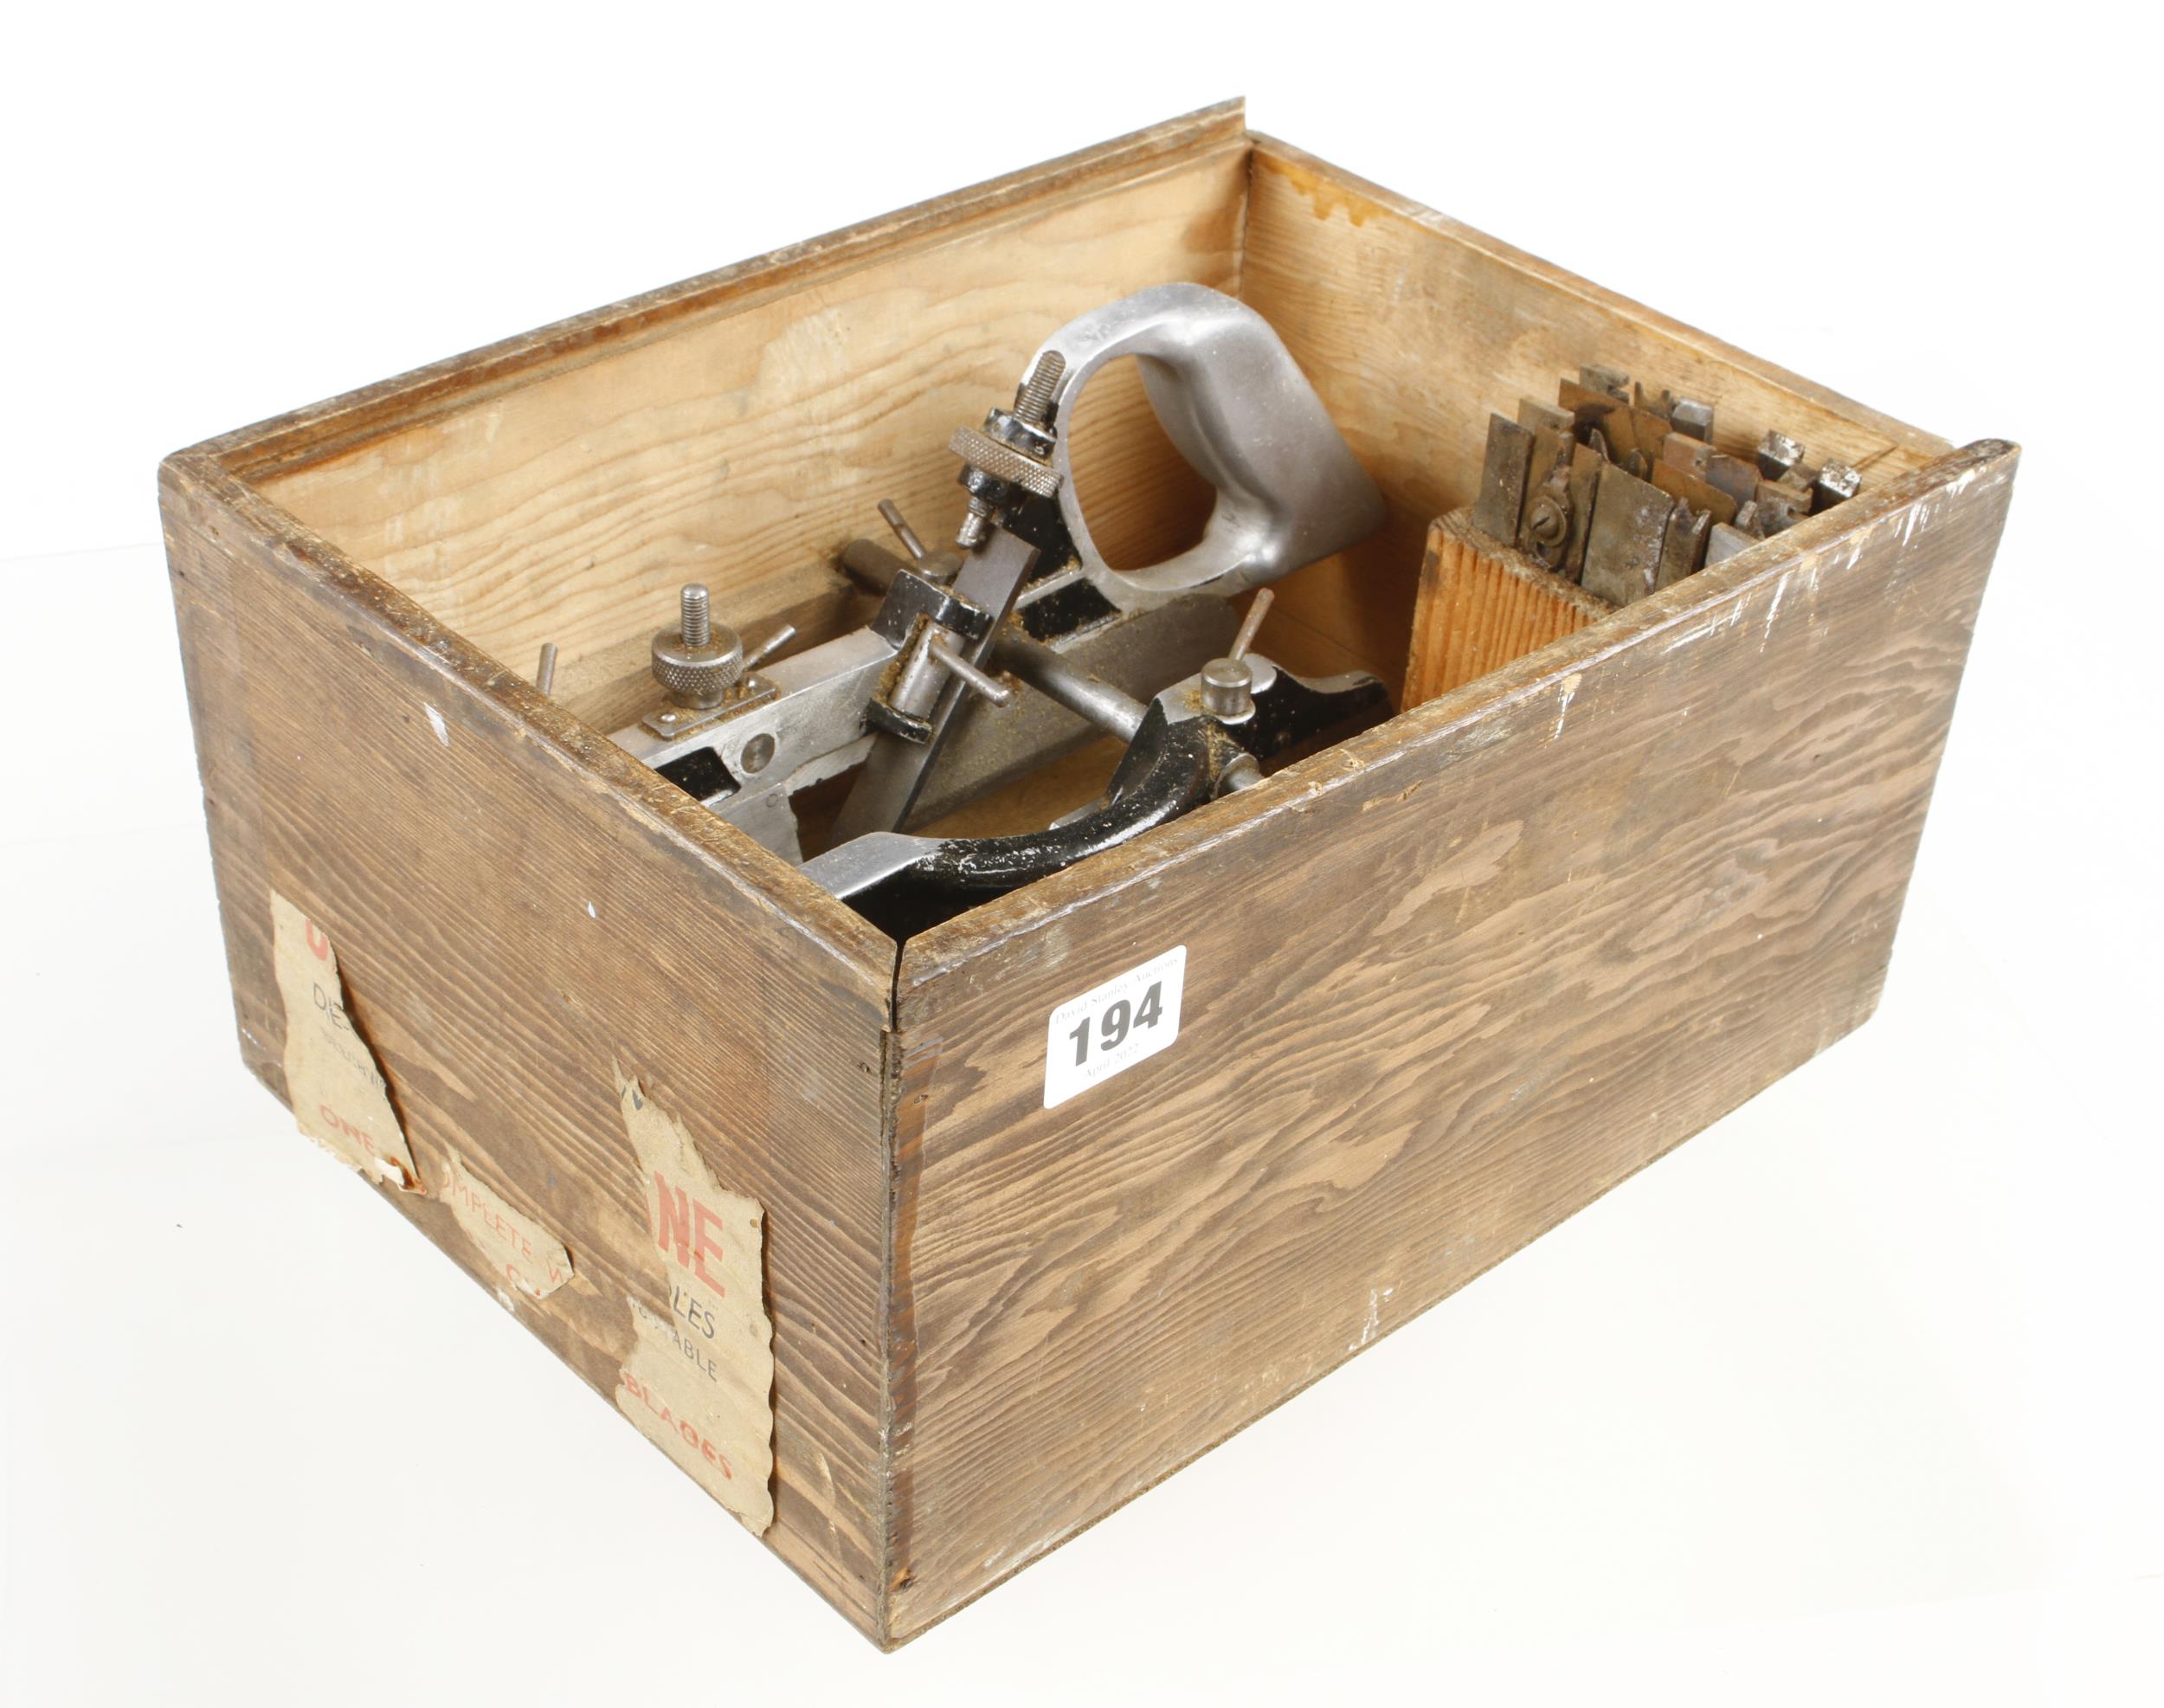 A LEWIN plough with cutters in orig box (lacks lid) G+ - Image 3 of 3